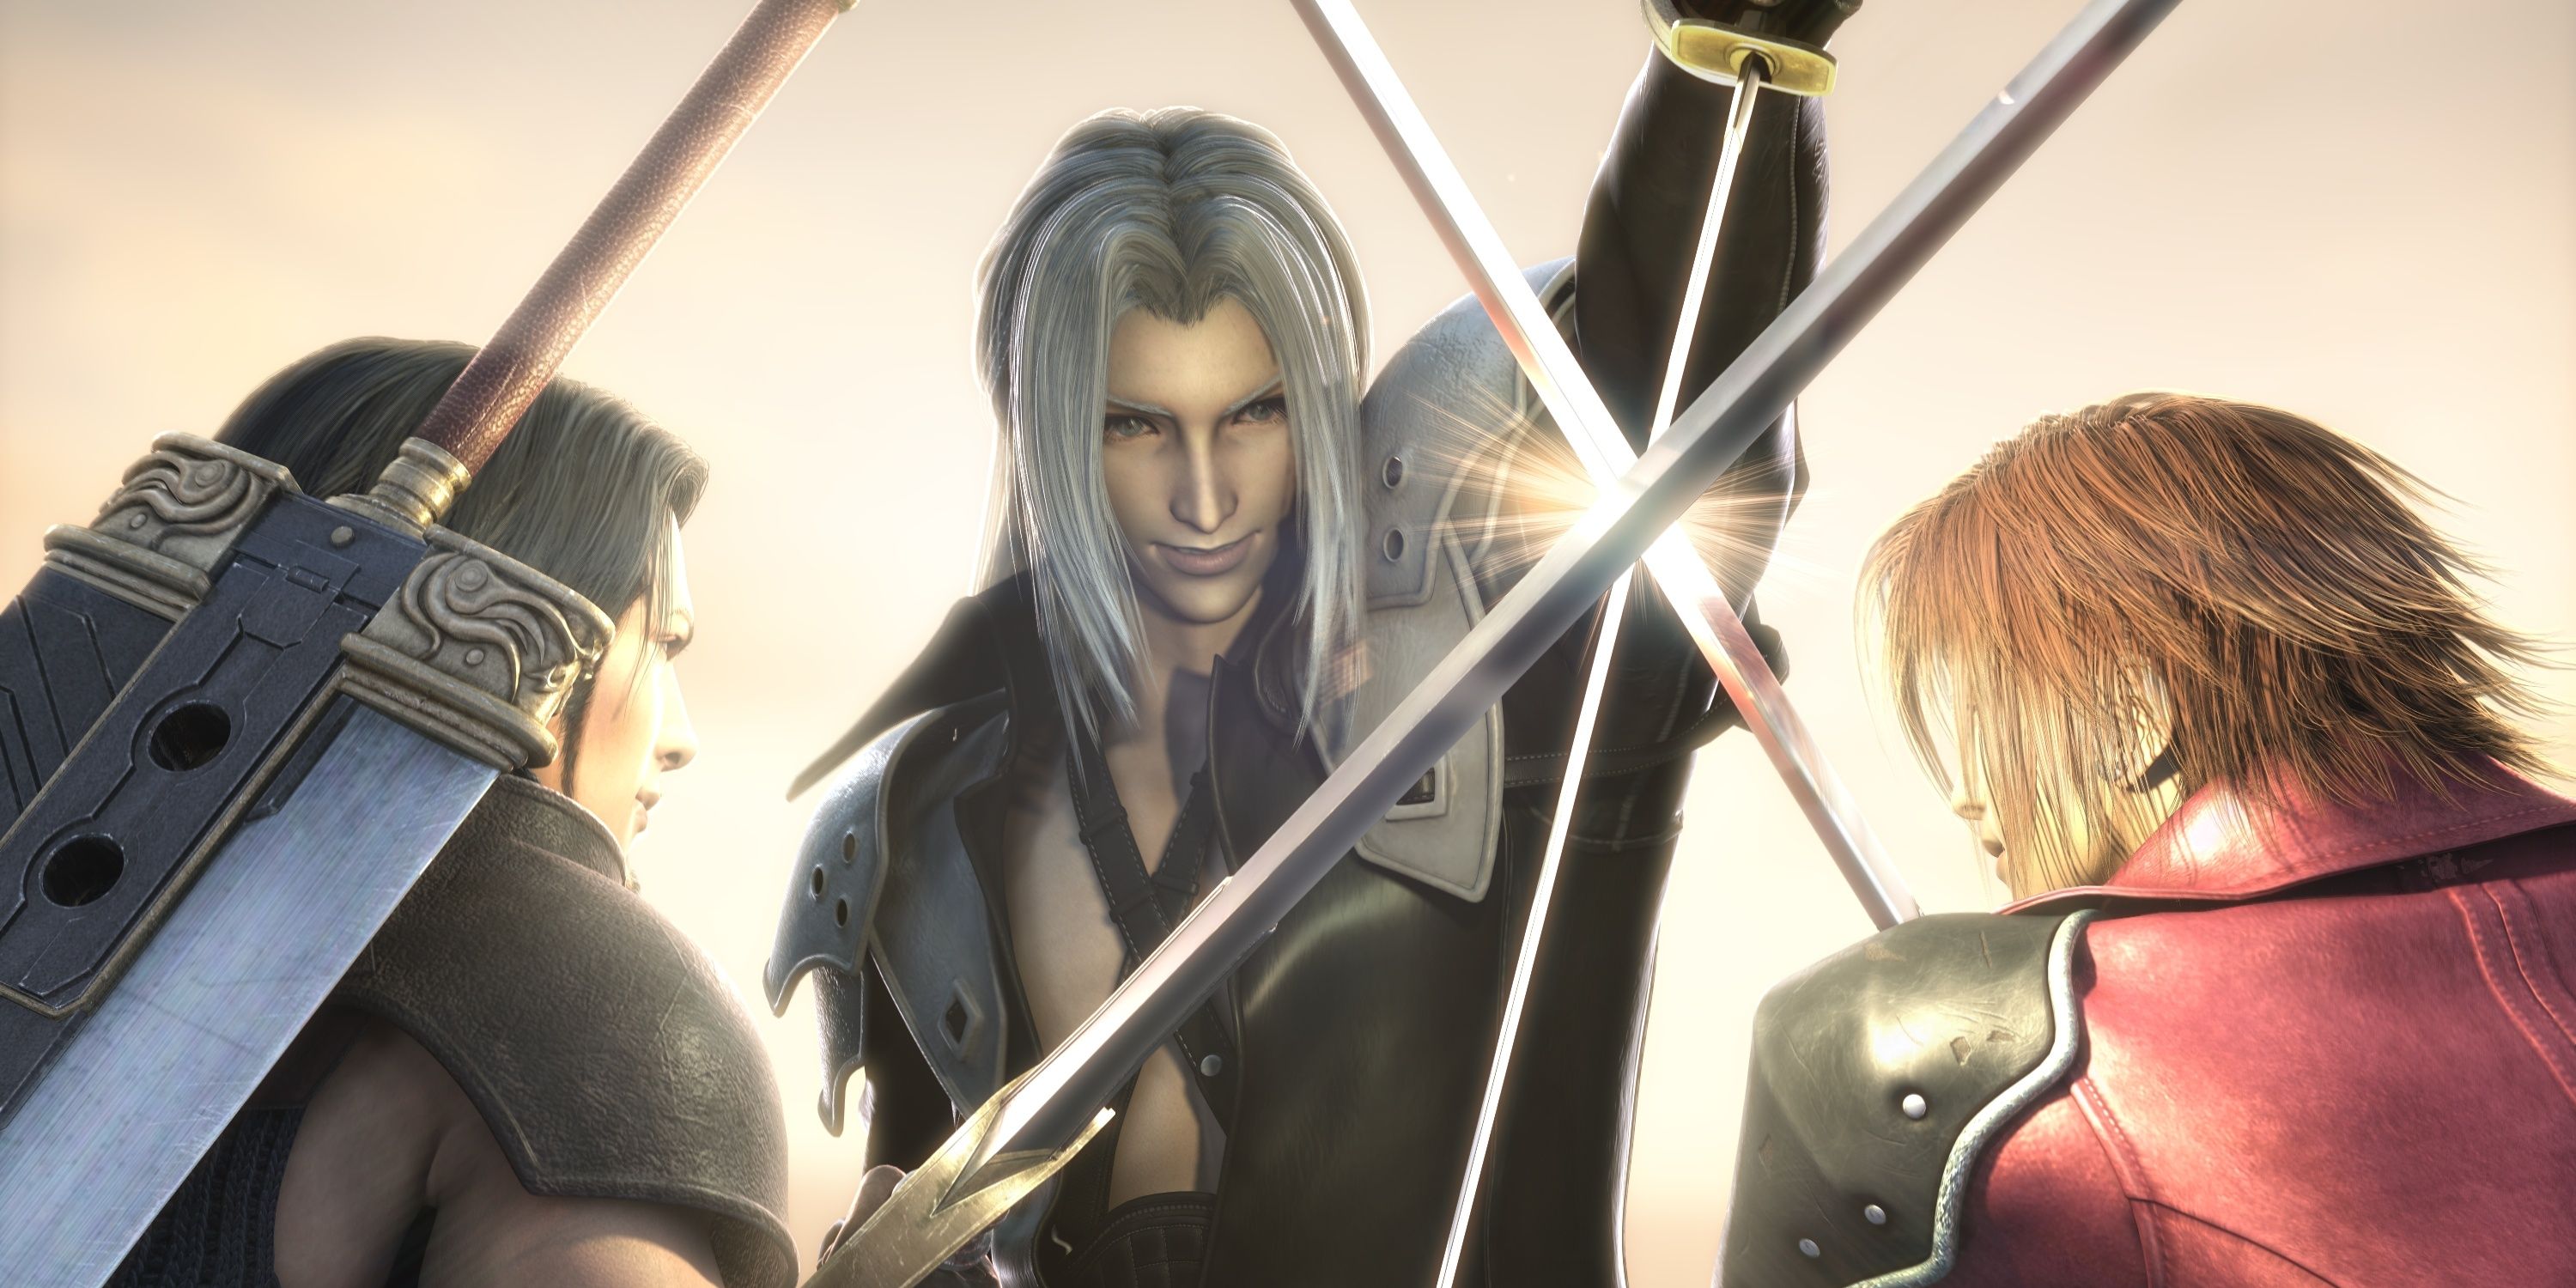 Angeal, Sephiroth, and Genesis in Crisis Core Final Fantasy 7